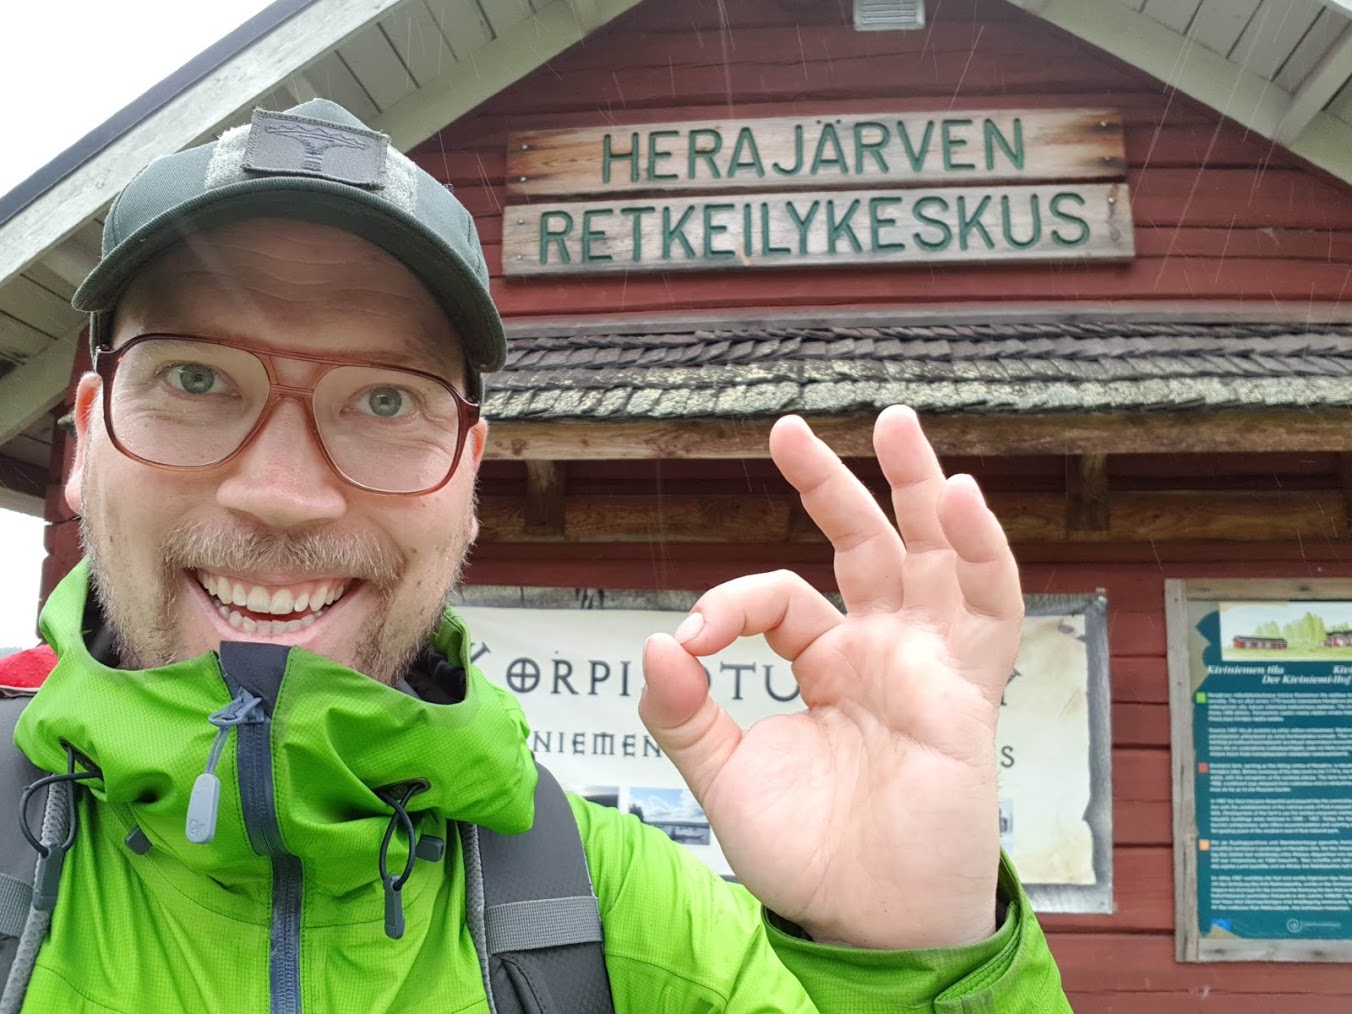 The hiker smiling widely and making an ok-sign with his fingers in front of Herajärven retkeilykeskus building.